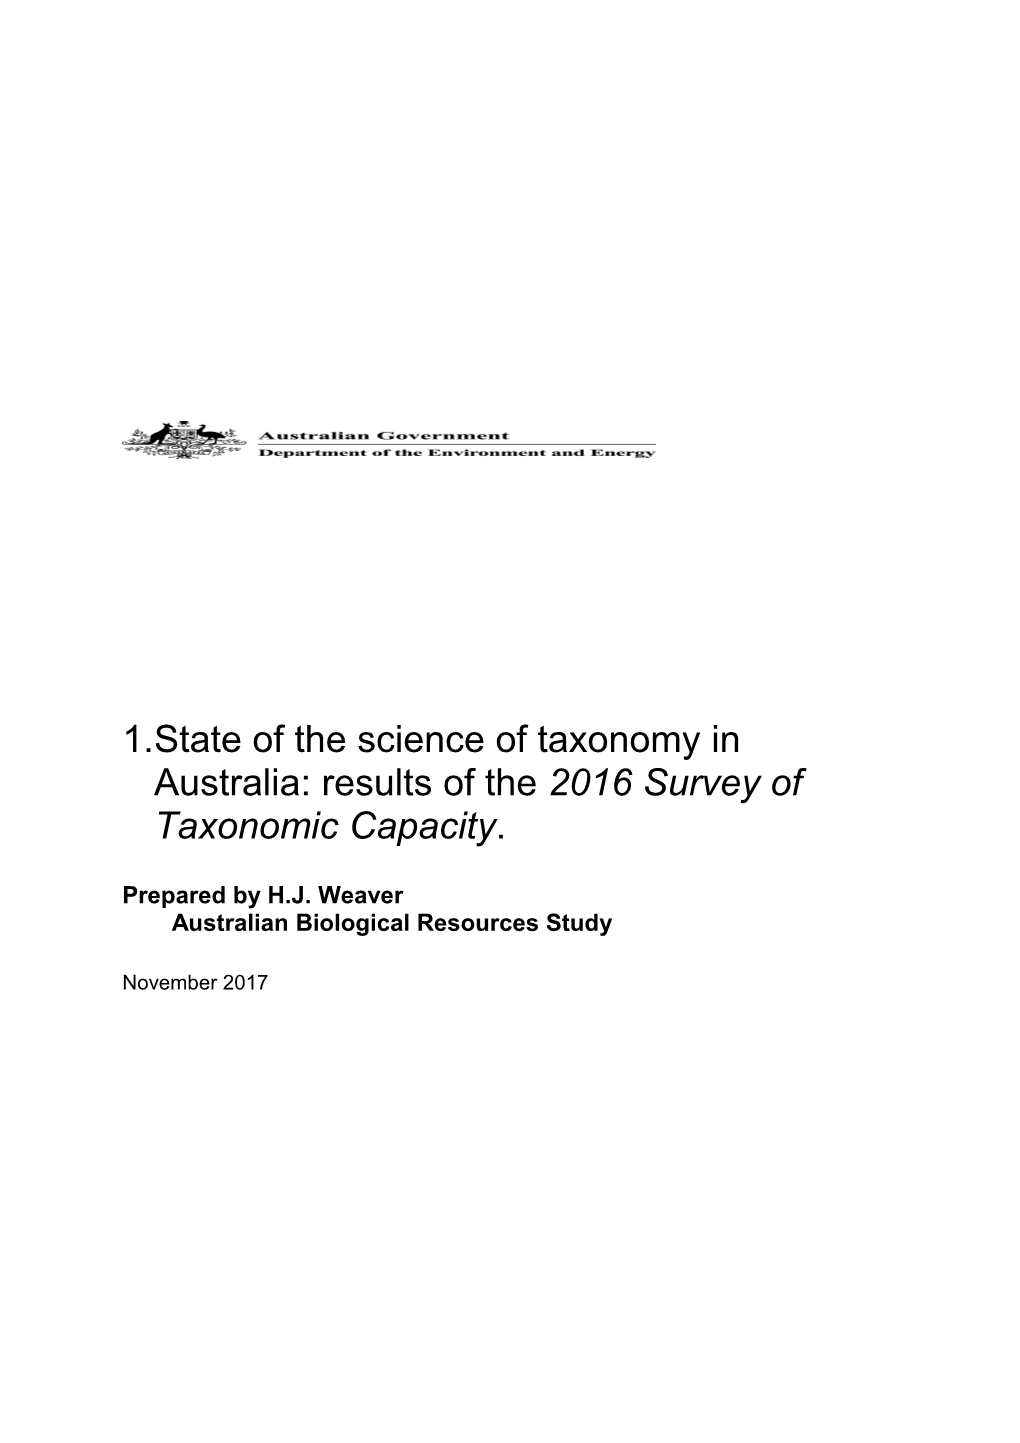 State of the Science of Taxonomy in Australia: Results of the 2016 Survey of Taxonomic Capacity